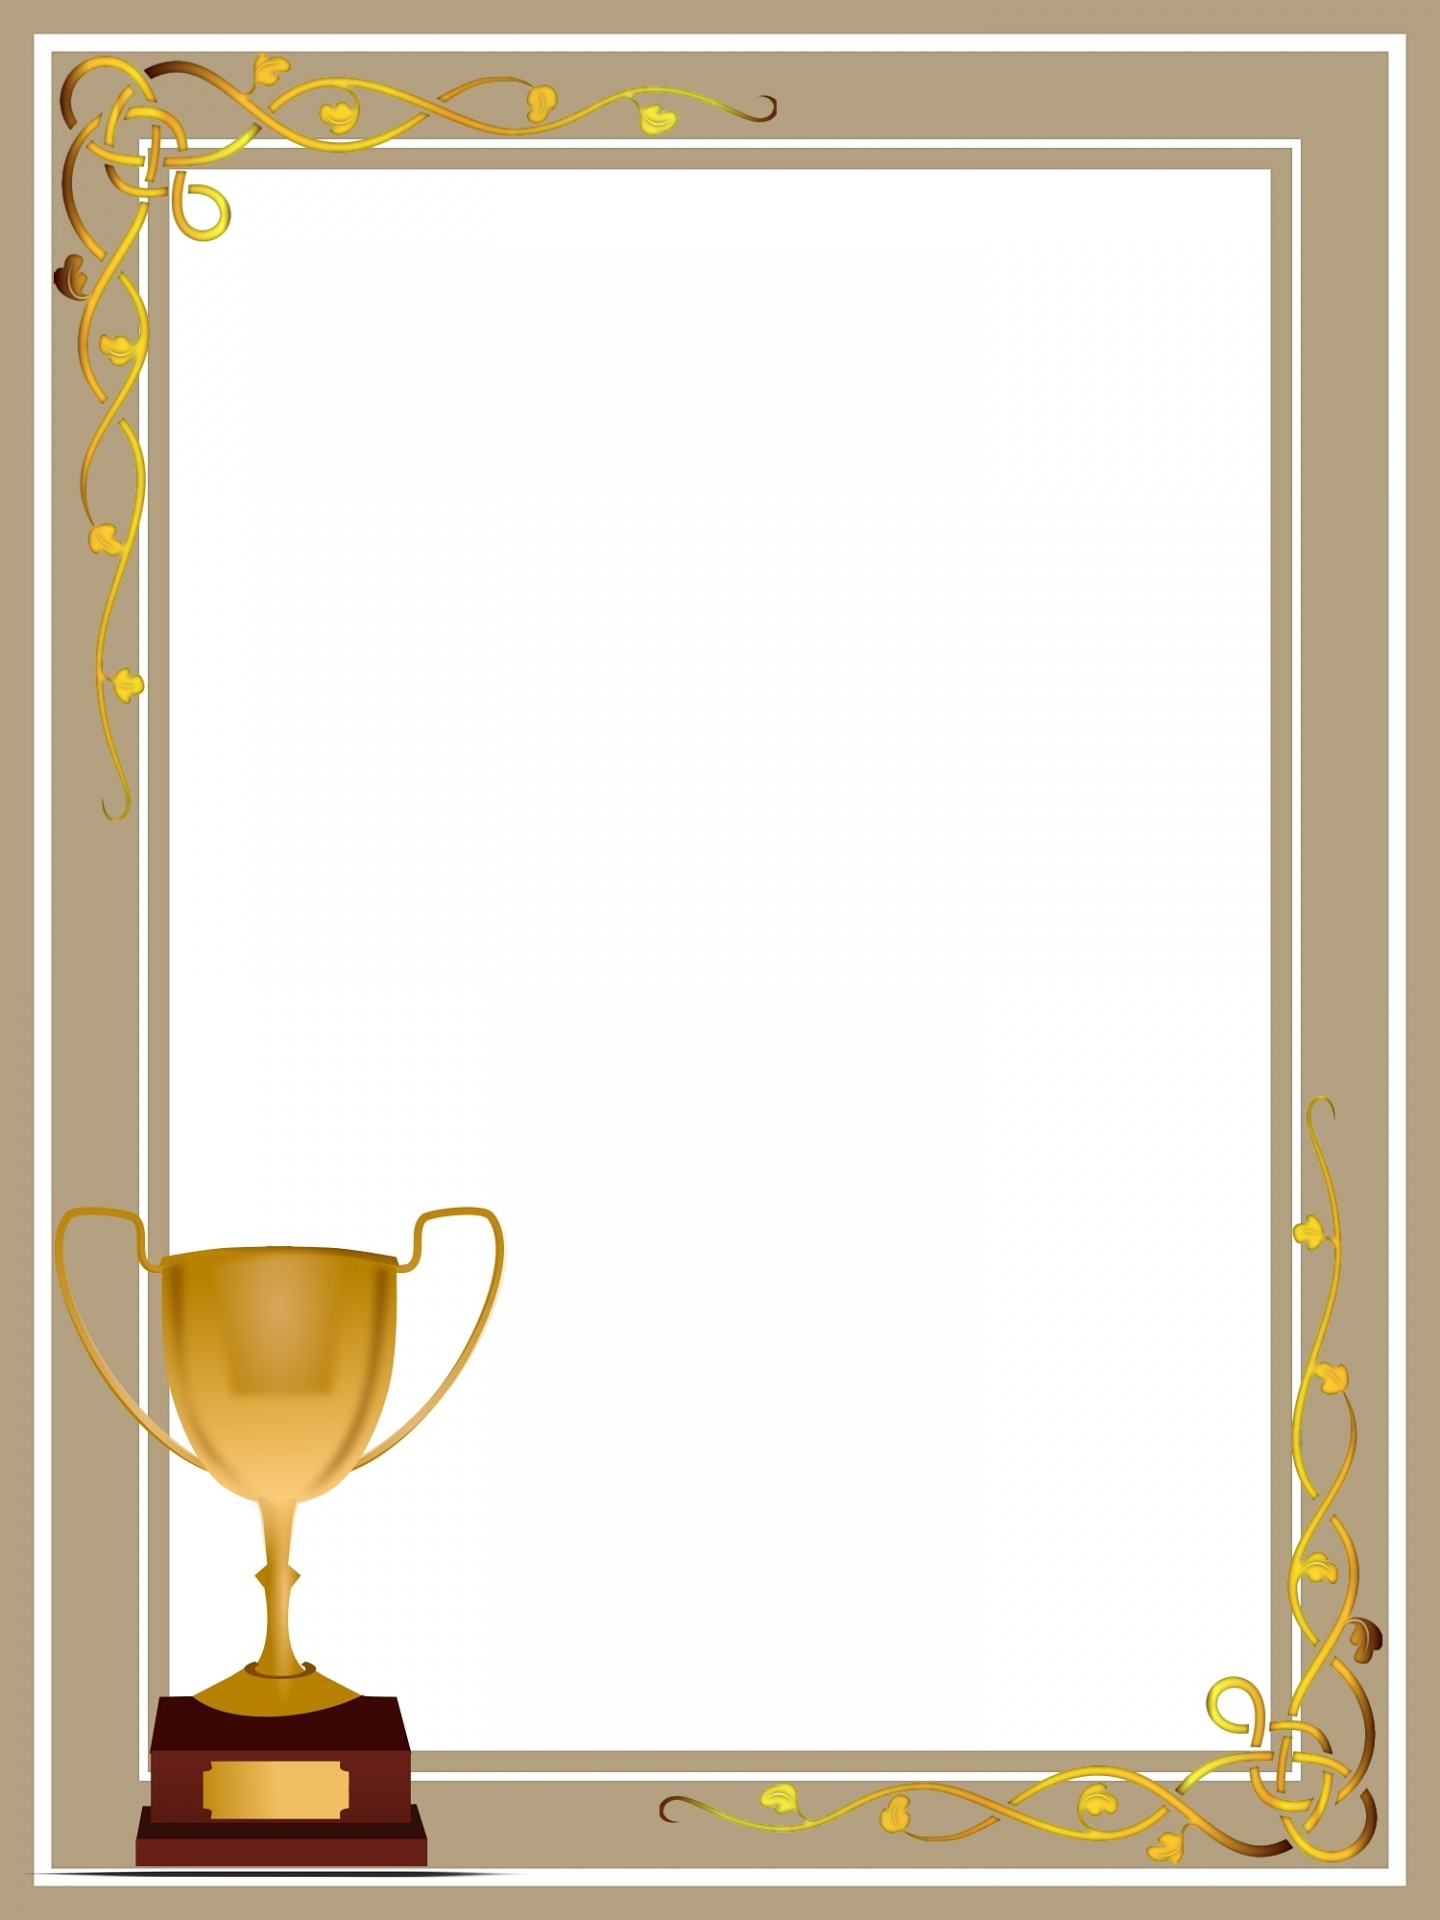 Download free photo of Background,picture frame,frames,trophy,award - from  